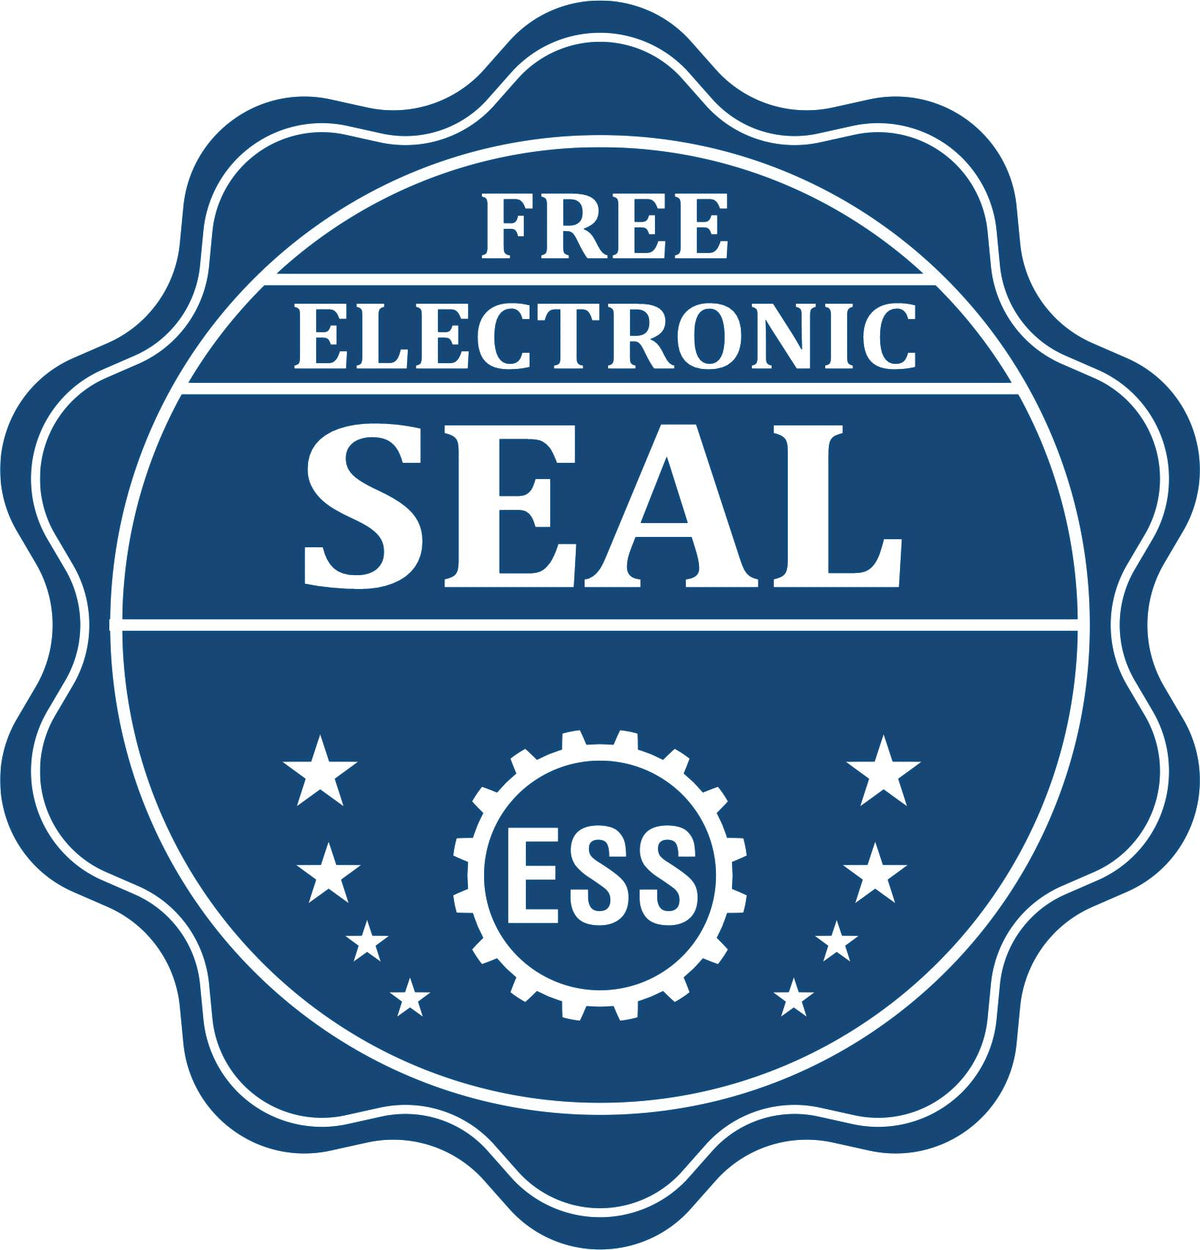 A badge showing a free electronic seal for the Premium MaxLight Pre-Inked Vermont Geology Stamp with stars and the ESS gear on the emblem.